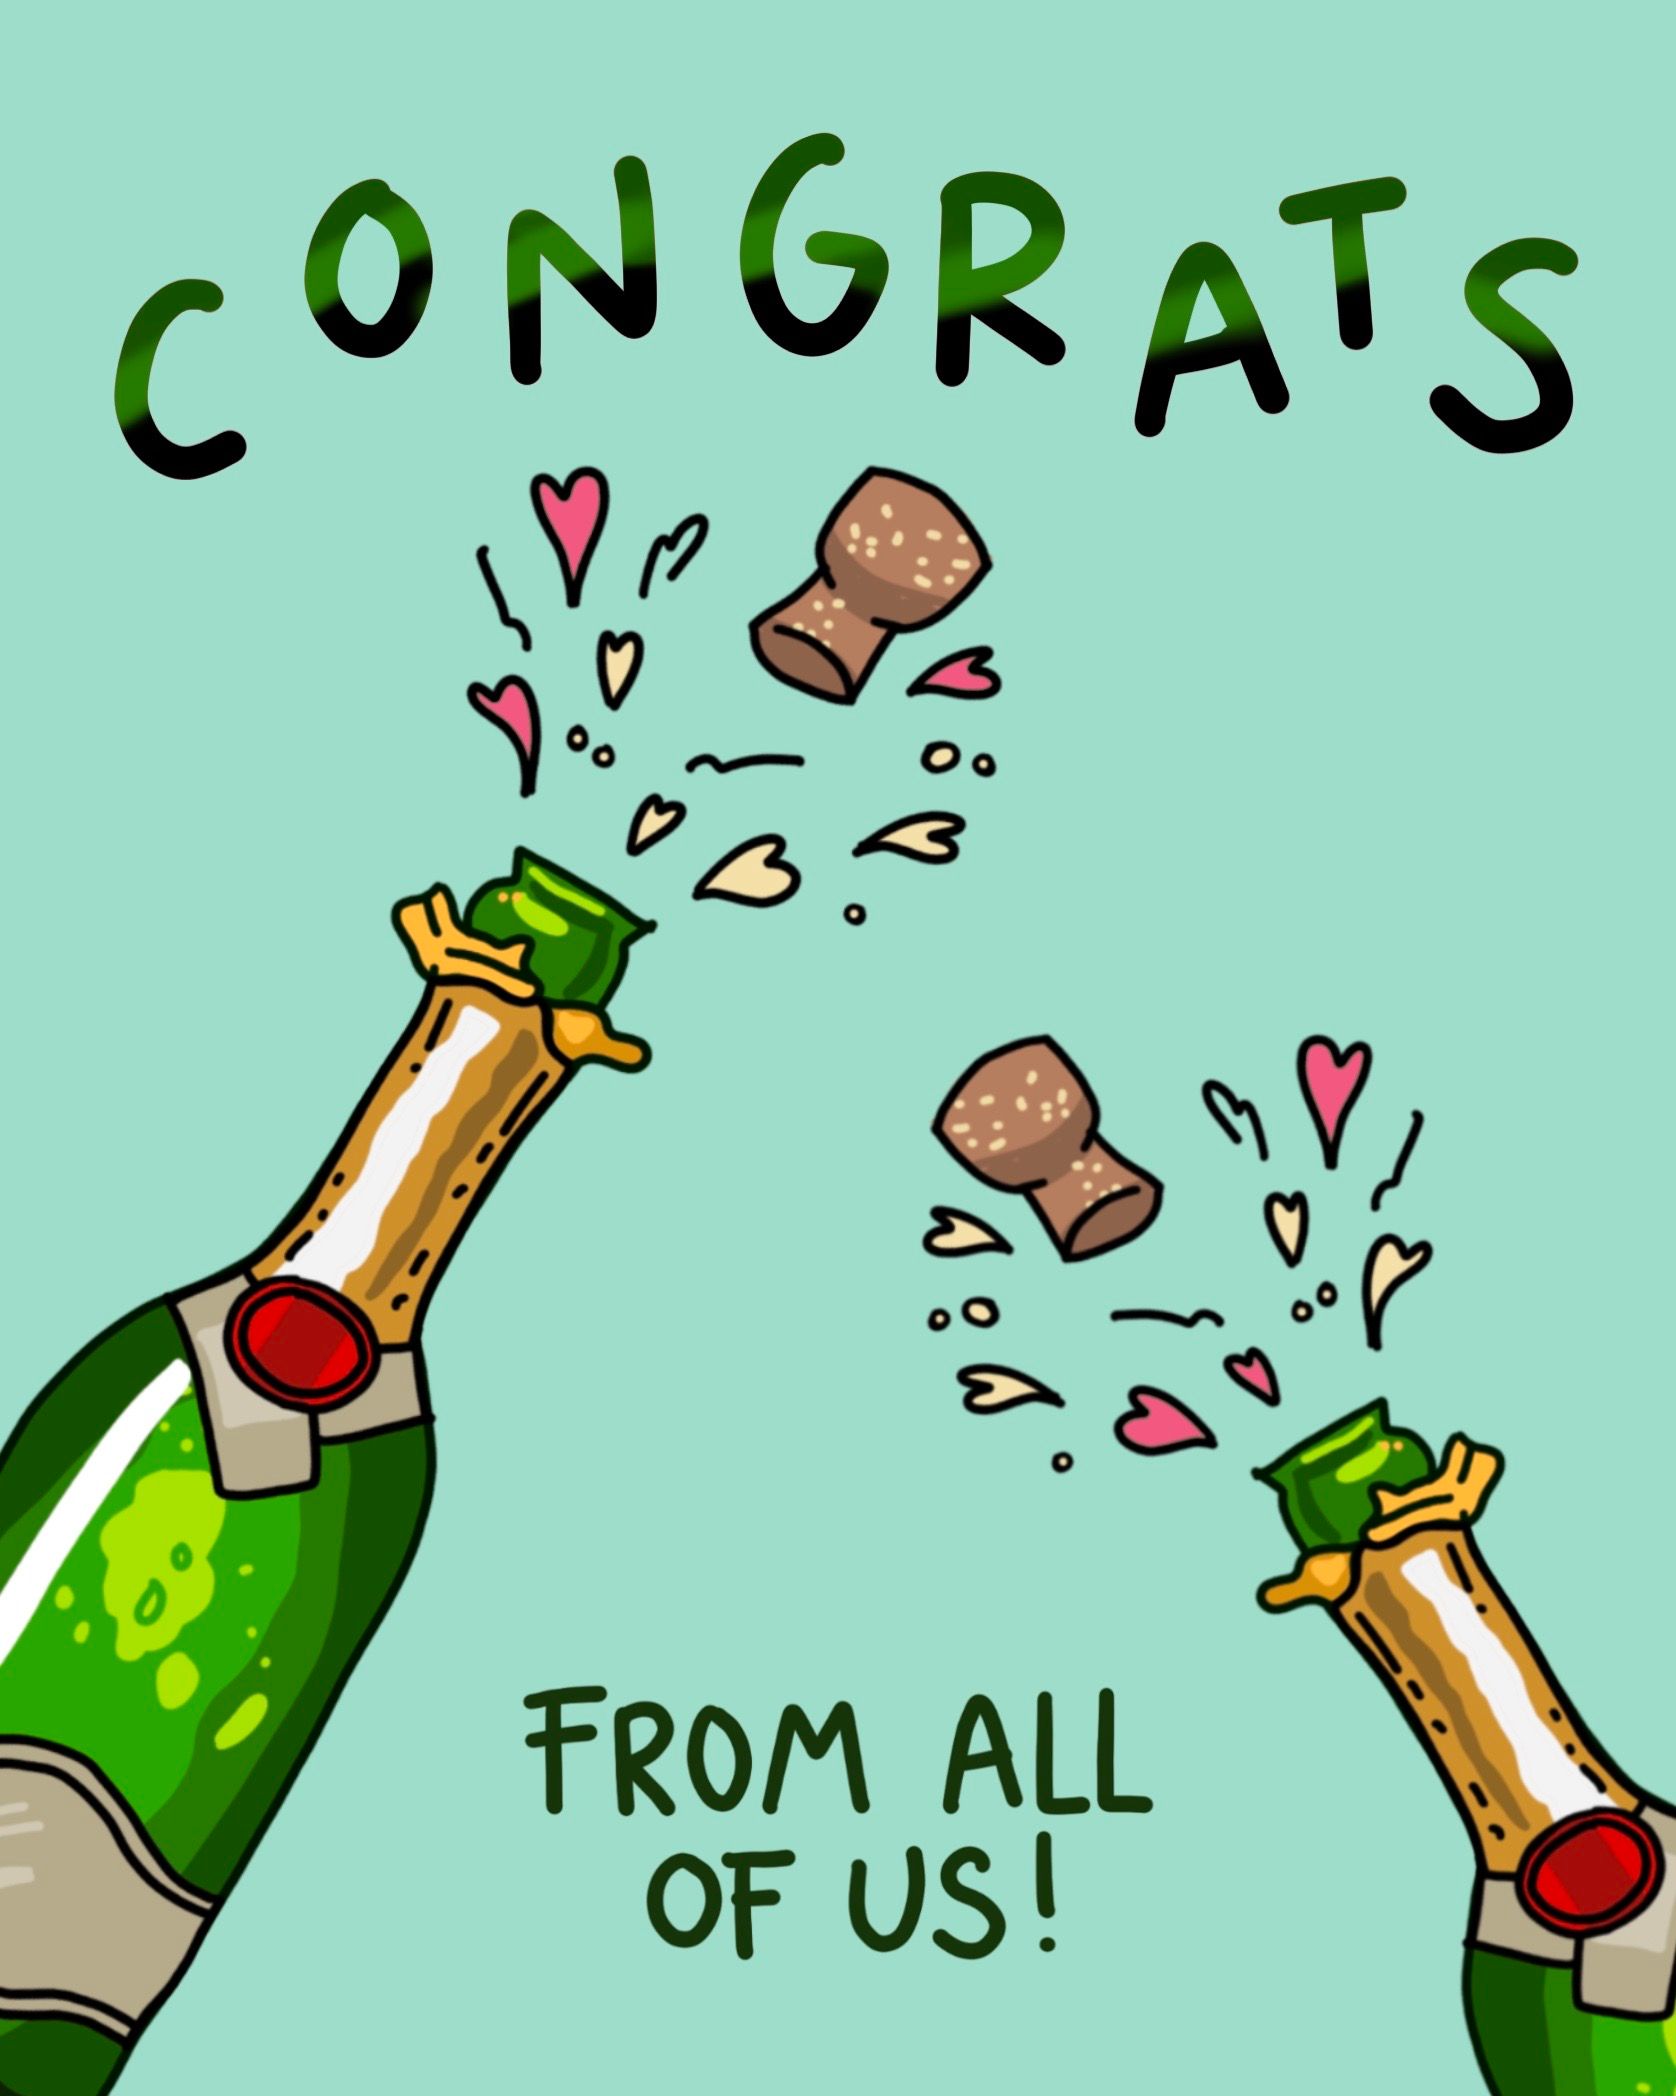 Card design "congrats from all of us"